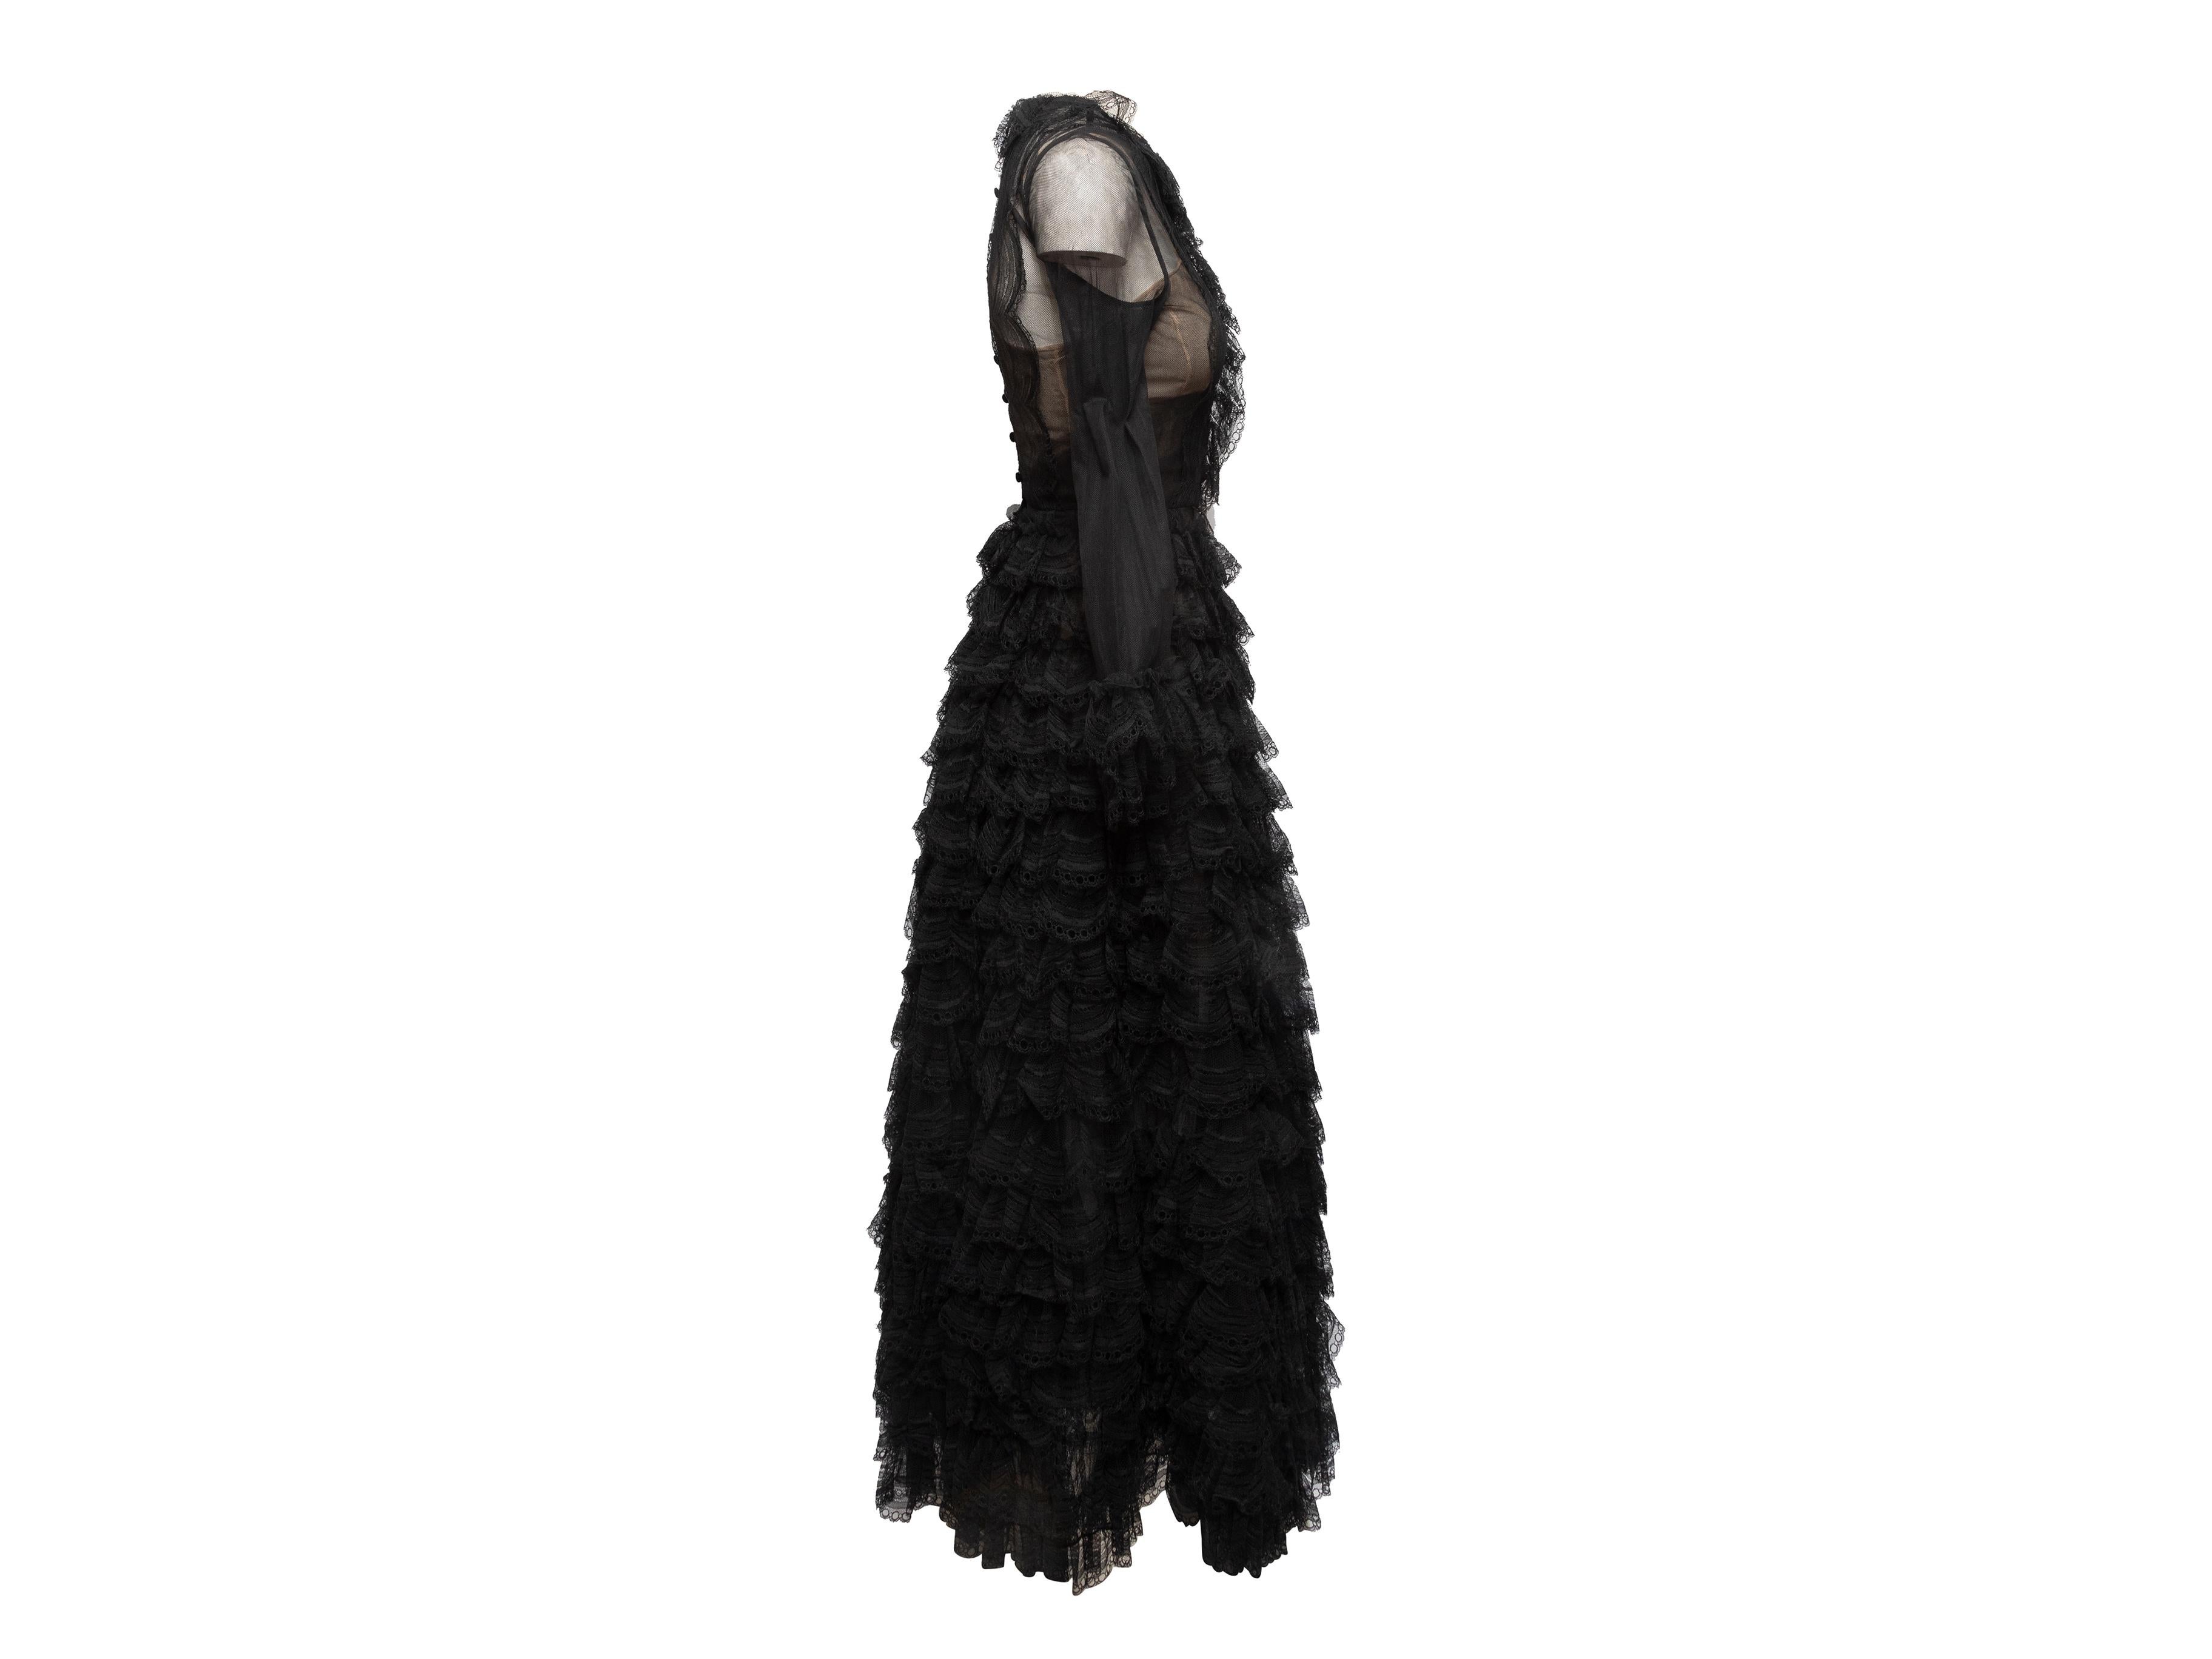 Product Details: Vintage black sheer lace evening gown by Oscar de la Renta. Crew neck. Ruffle trim at cuffs and crew neck. Tiered skirt. Button closures at center back. 28